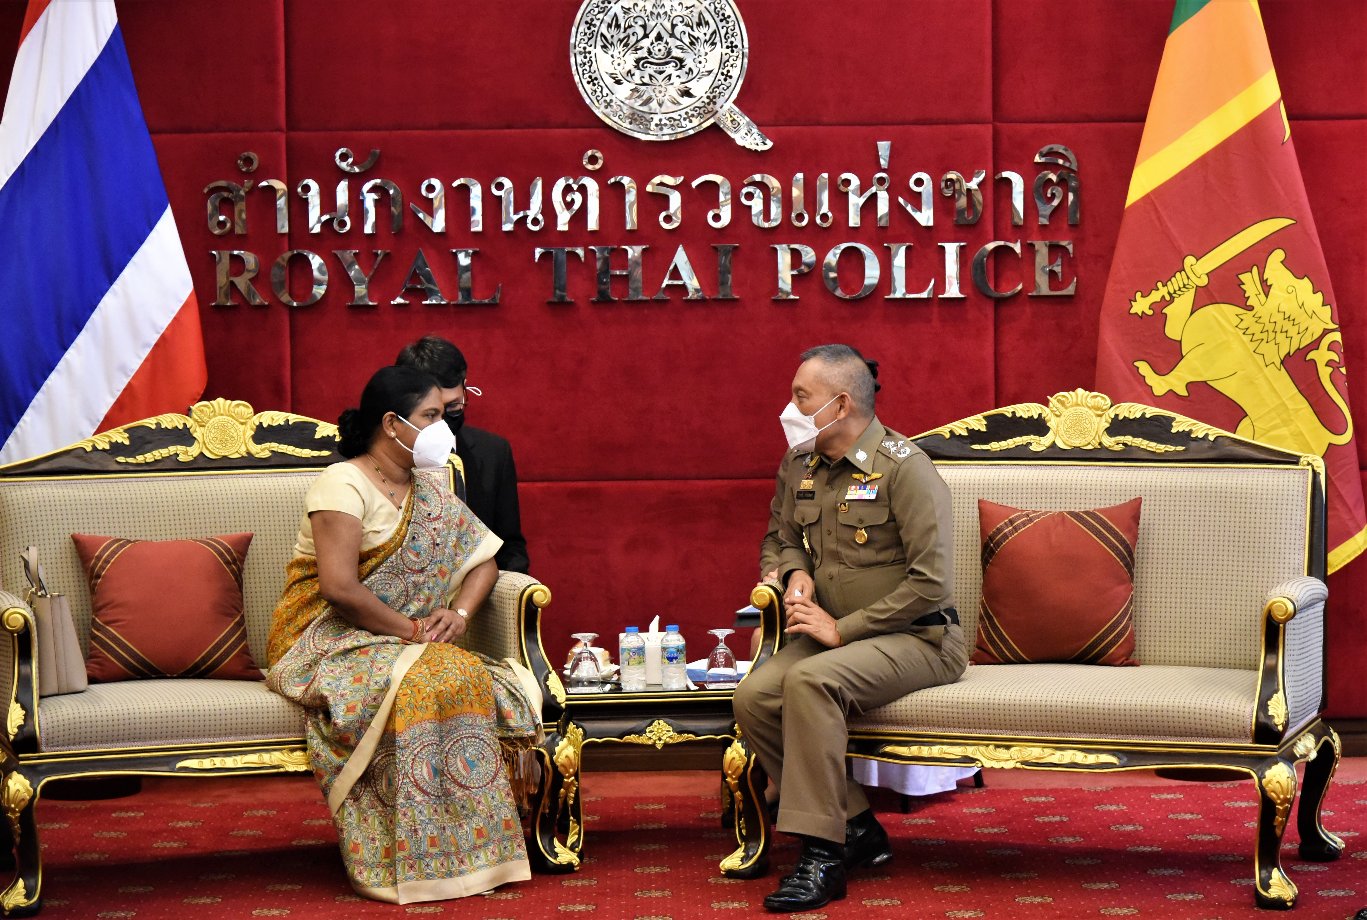 Ambassador of Sri Lanka to the Kingdom of Thailand and Permanent Representative to UNESCAP, C.A. Chaminda I. Colonne paid a courtesy call on Police General Wirachai Songmetta, Deputy Commissioner General, at the Royal Thai Police Headquarters on 25 November 2021